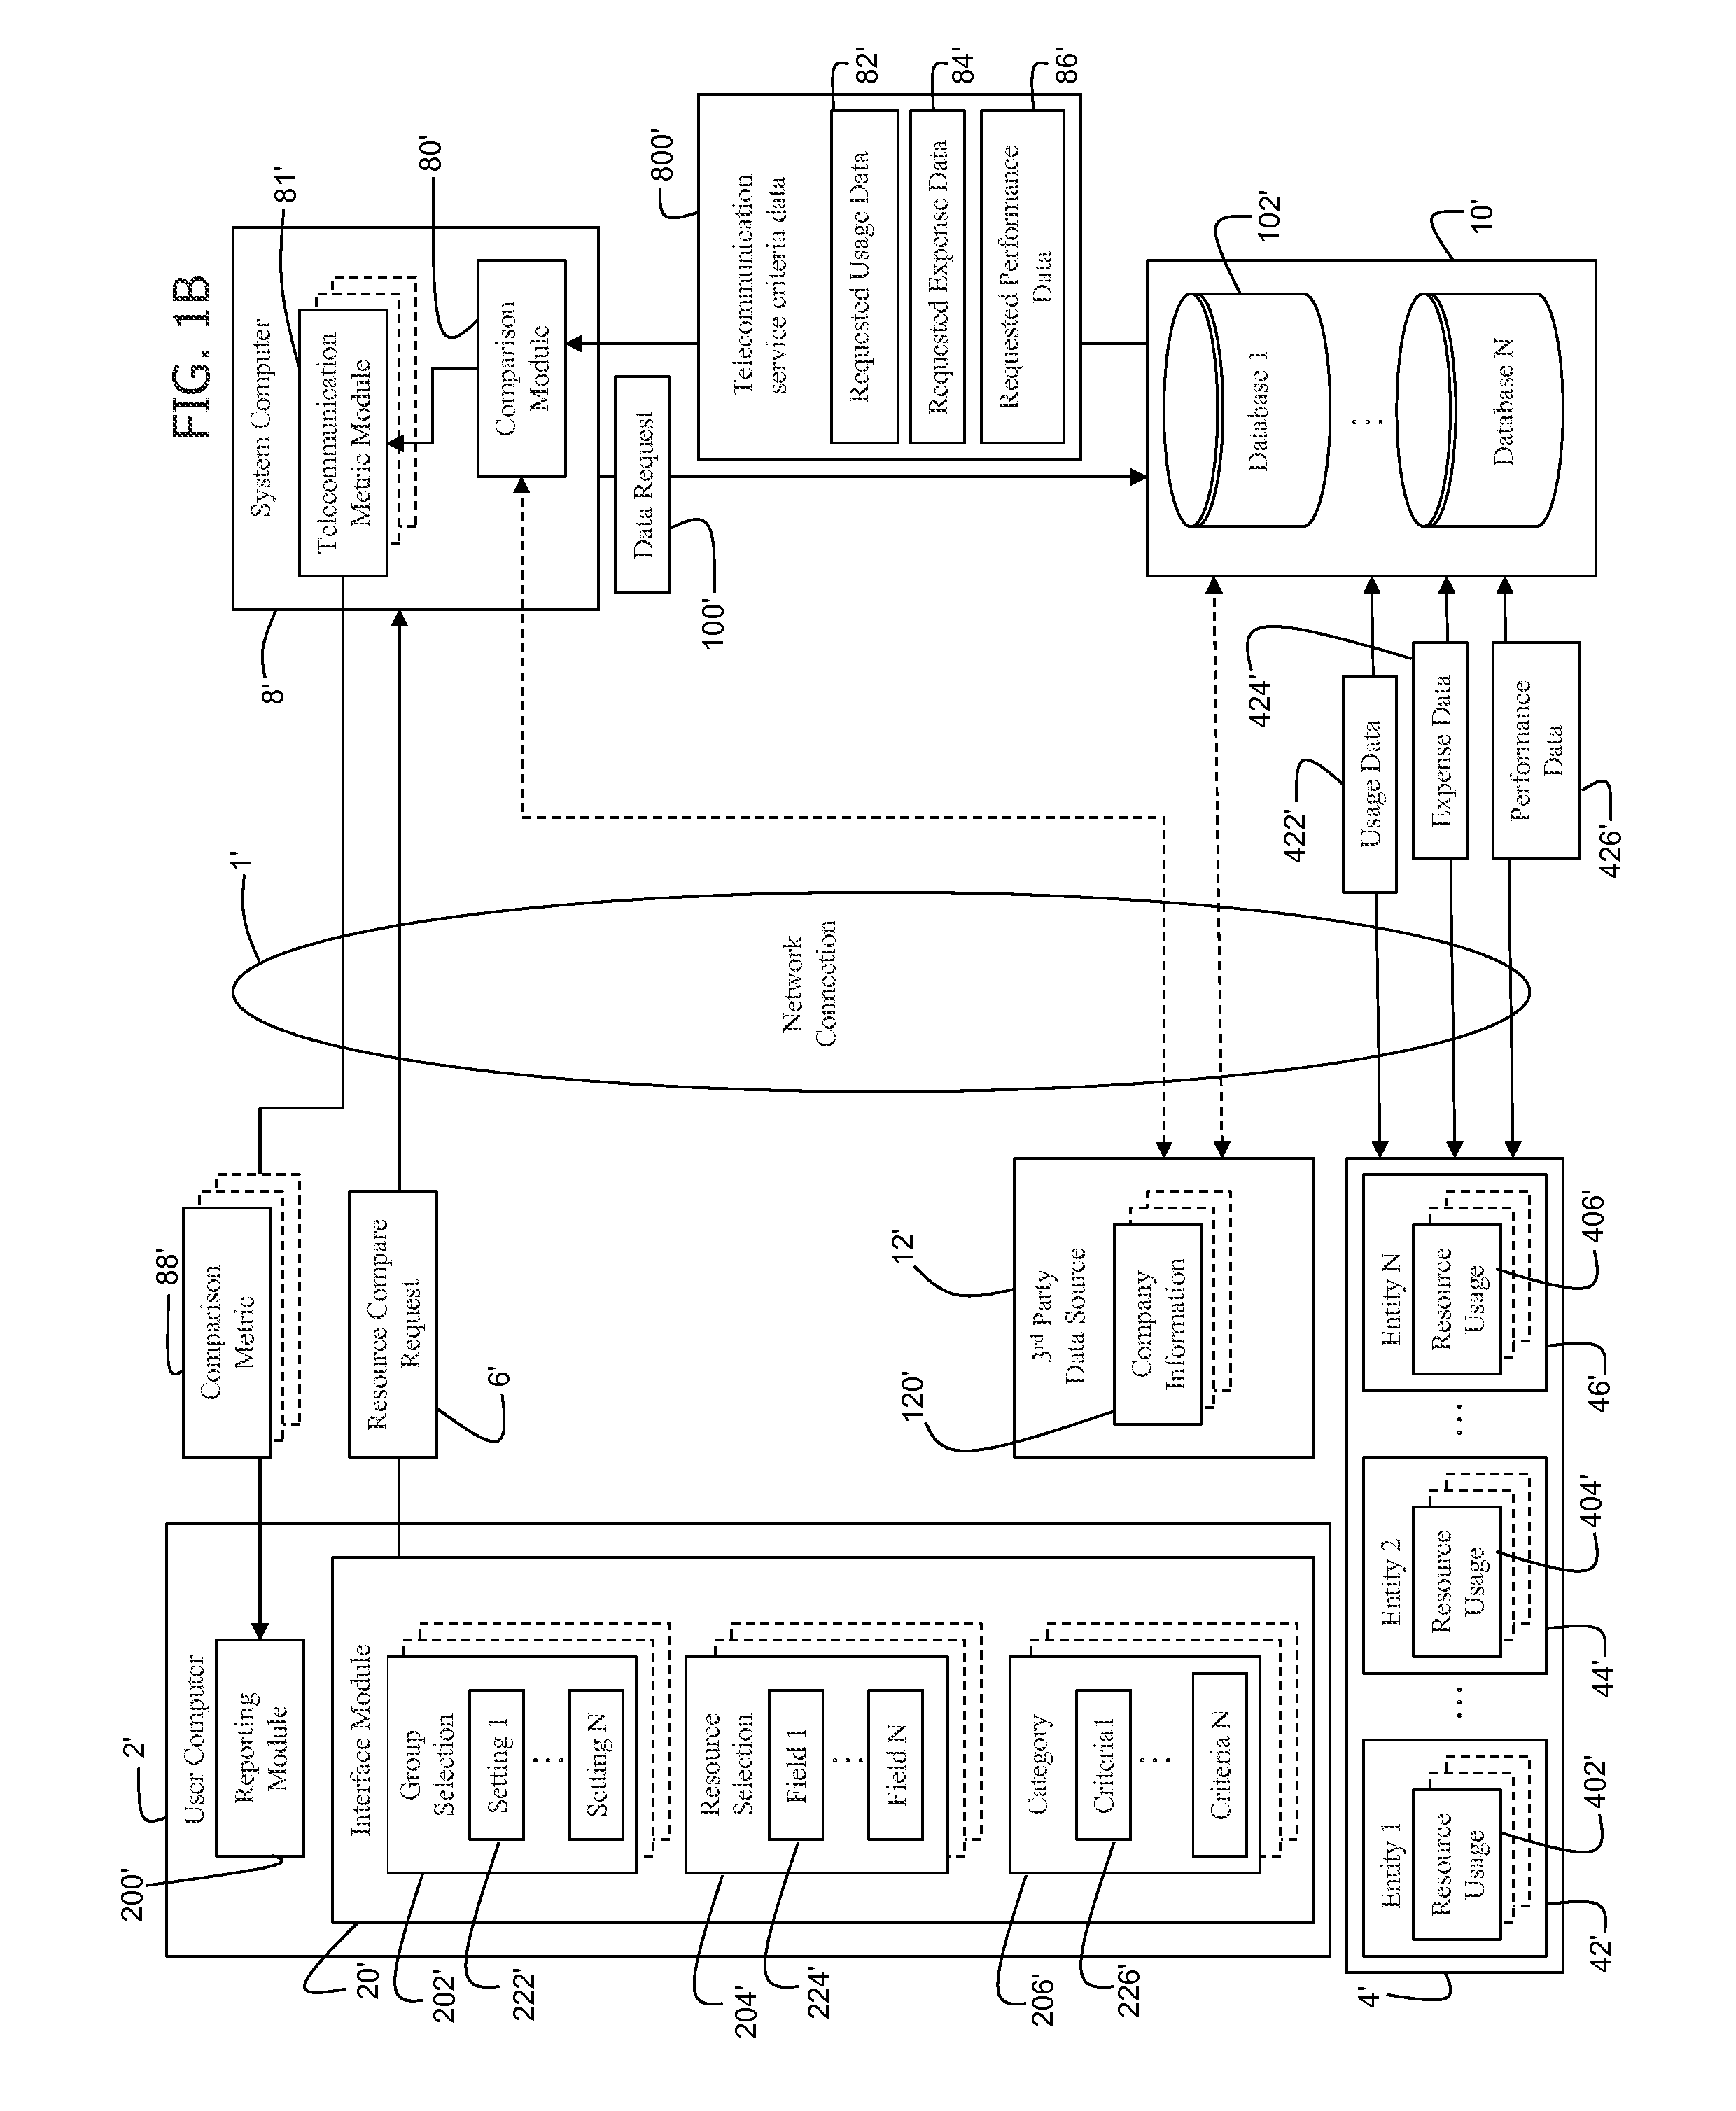 System And Method For Resource Usage, Performance And Expenditure Comparison